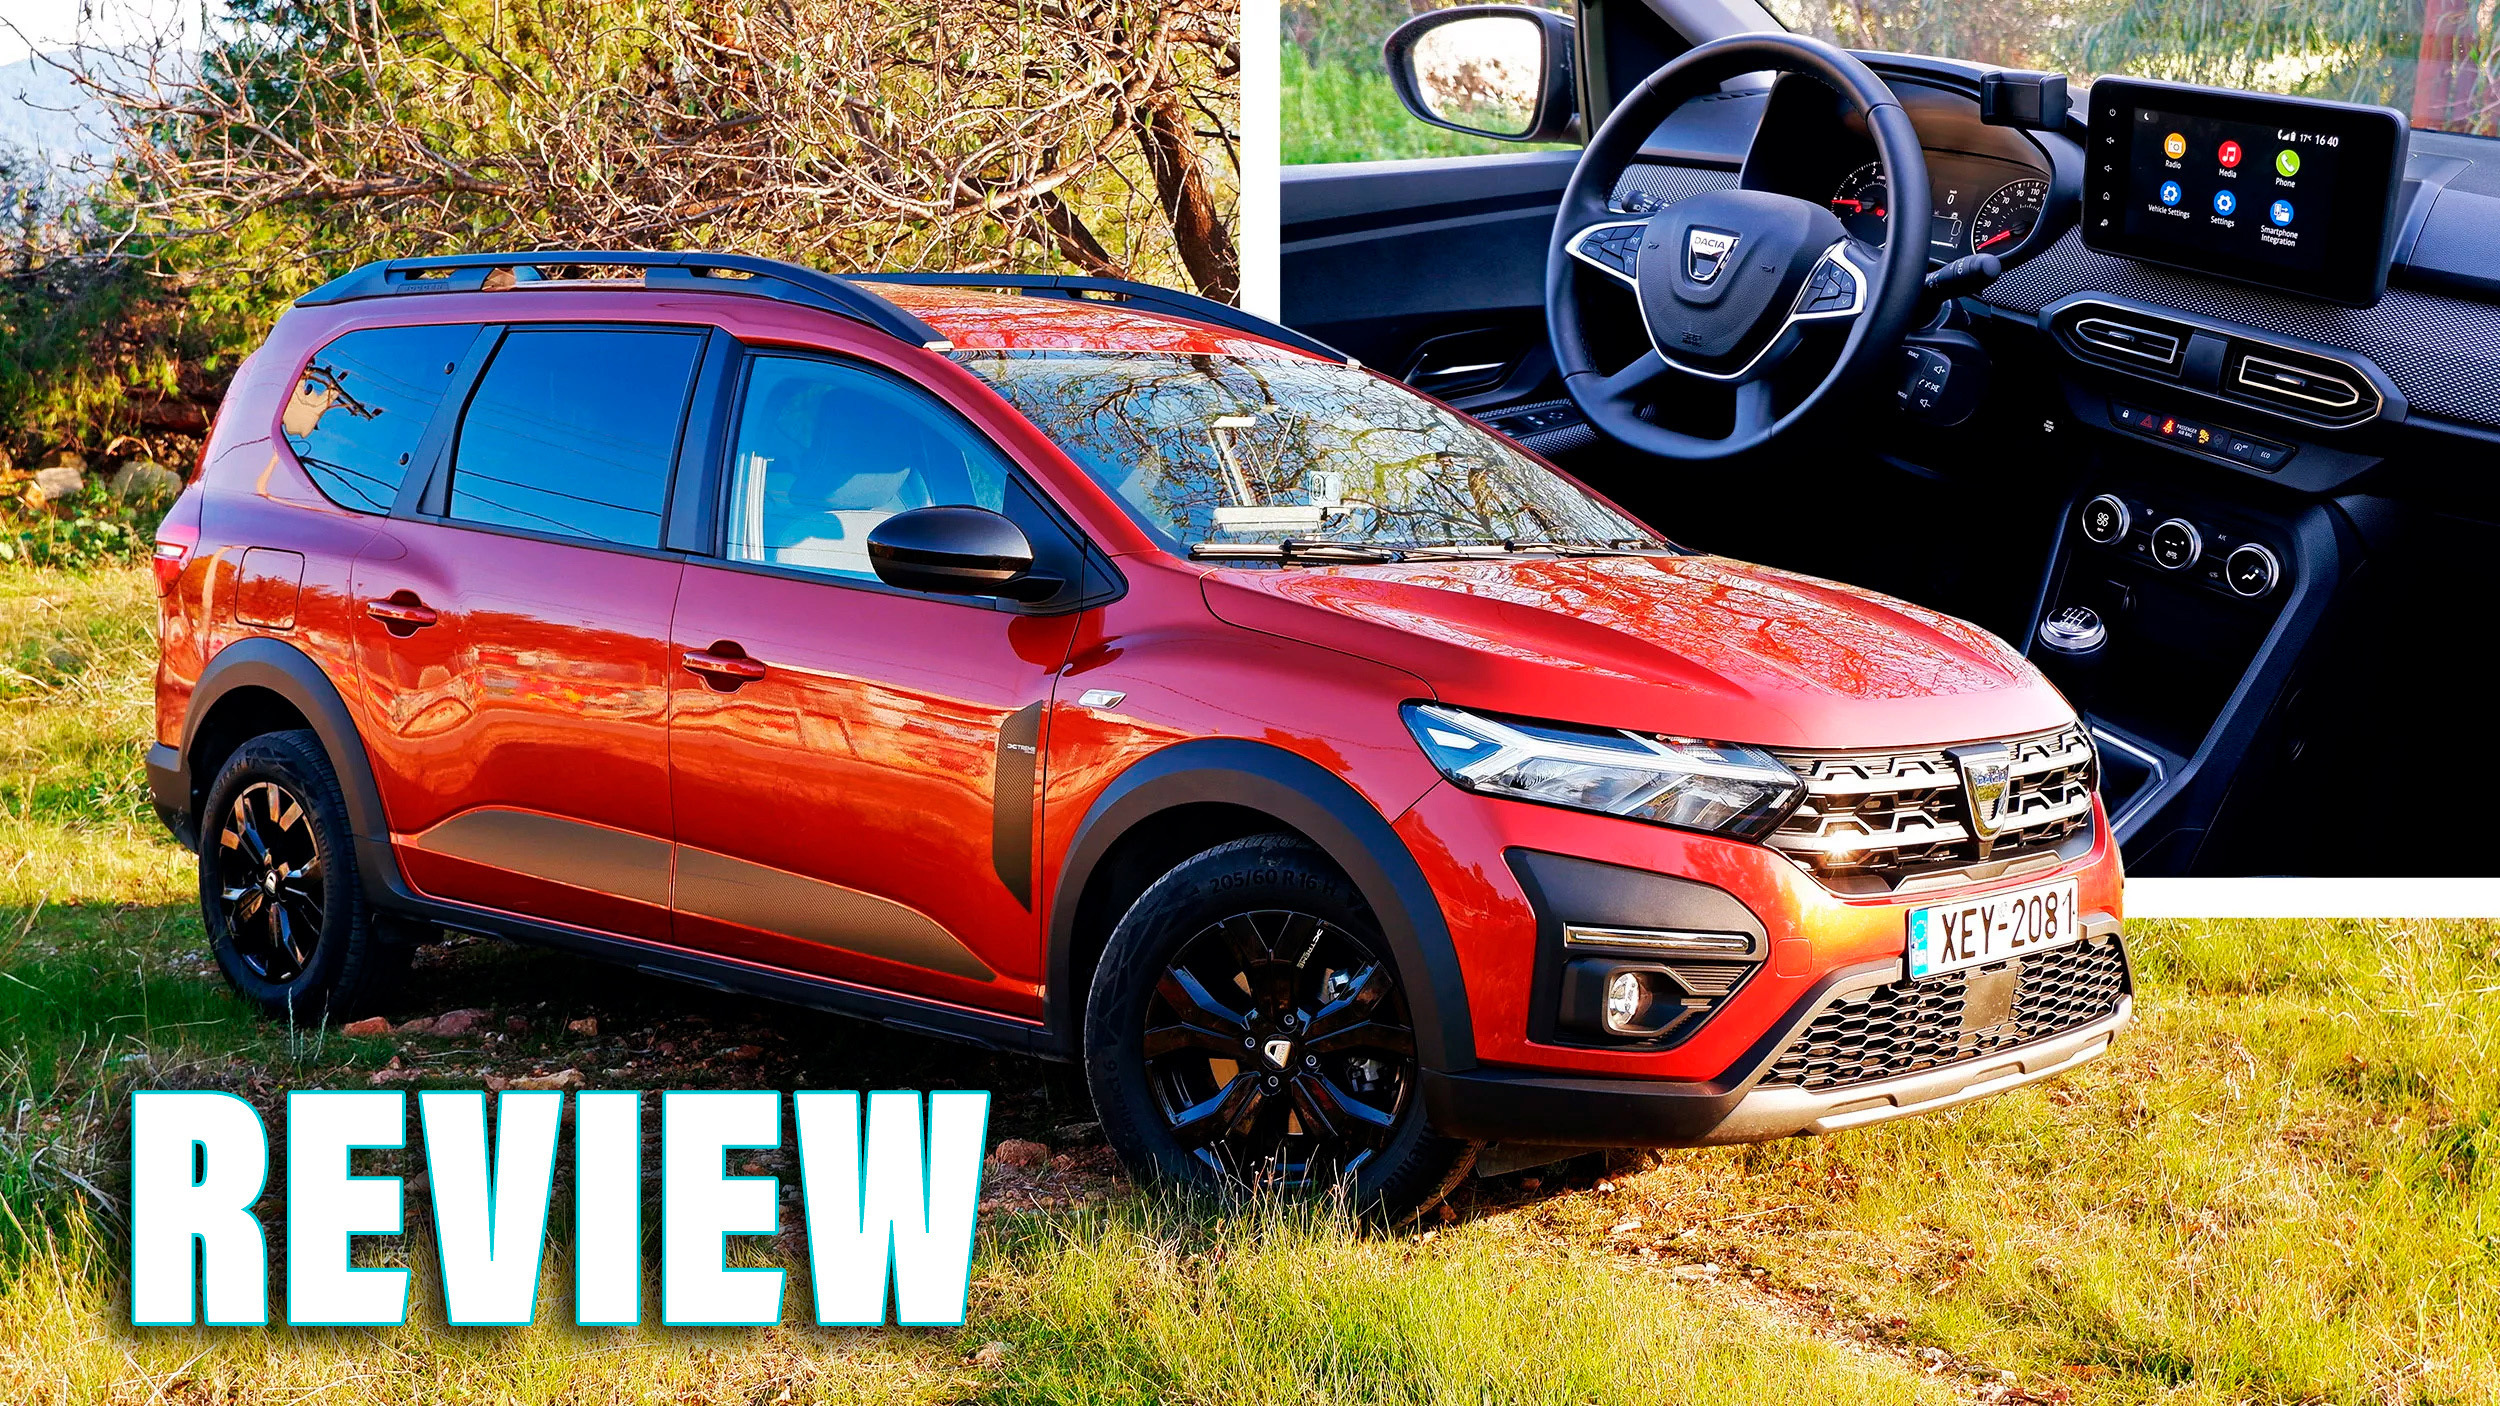 Driven: The Dacia Jogger 1.0 TCe LPG Is Your Budget-Friendly Family Hauler